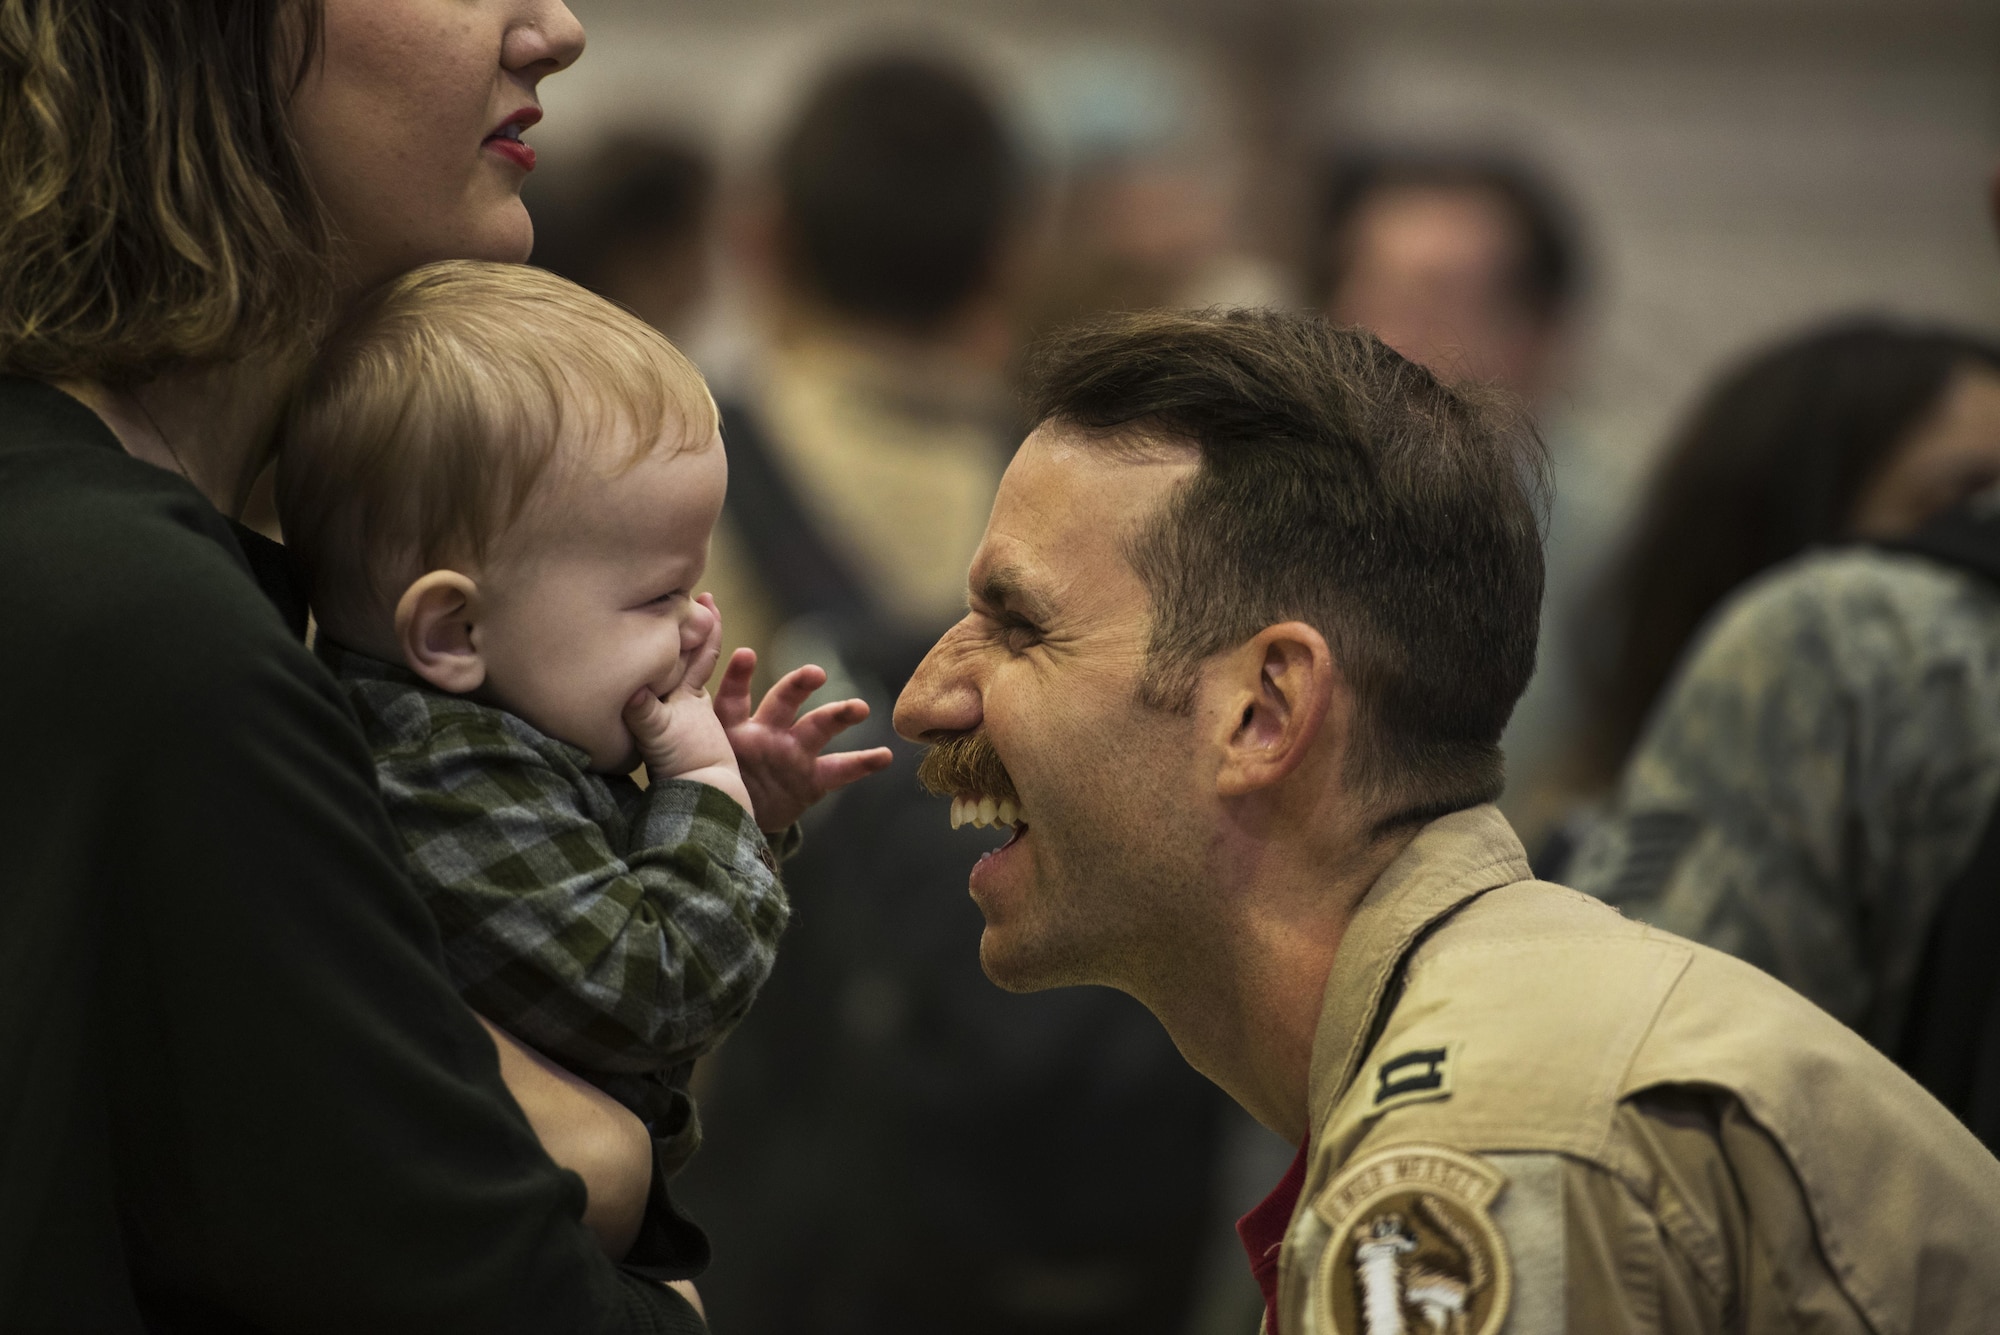 An Airman assigned to the 480th Expeditionary Fighter Squadron reunite with his family during the squadron’s
return to Spangdahlem Air Base, Germany, Oct. 12, 2016. Approximately 300 of the squadron’s Airmen, who serve
in flight, maintenance or support roles for the F-16 Fighting Falcon fighter aircraft, completed a six-month
deployment to Southwest Asia by providing close air support and dynamic targeting operations in support of
Operation Inherent Resolve. (U.S. Air Force photo by Staff Sgt. Jonathan Snyder)